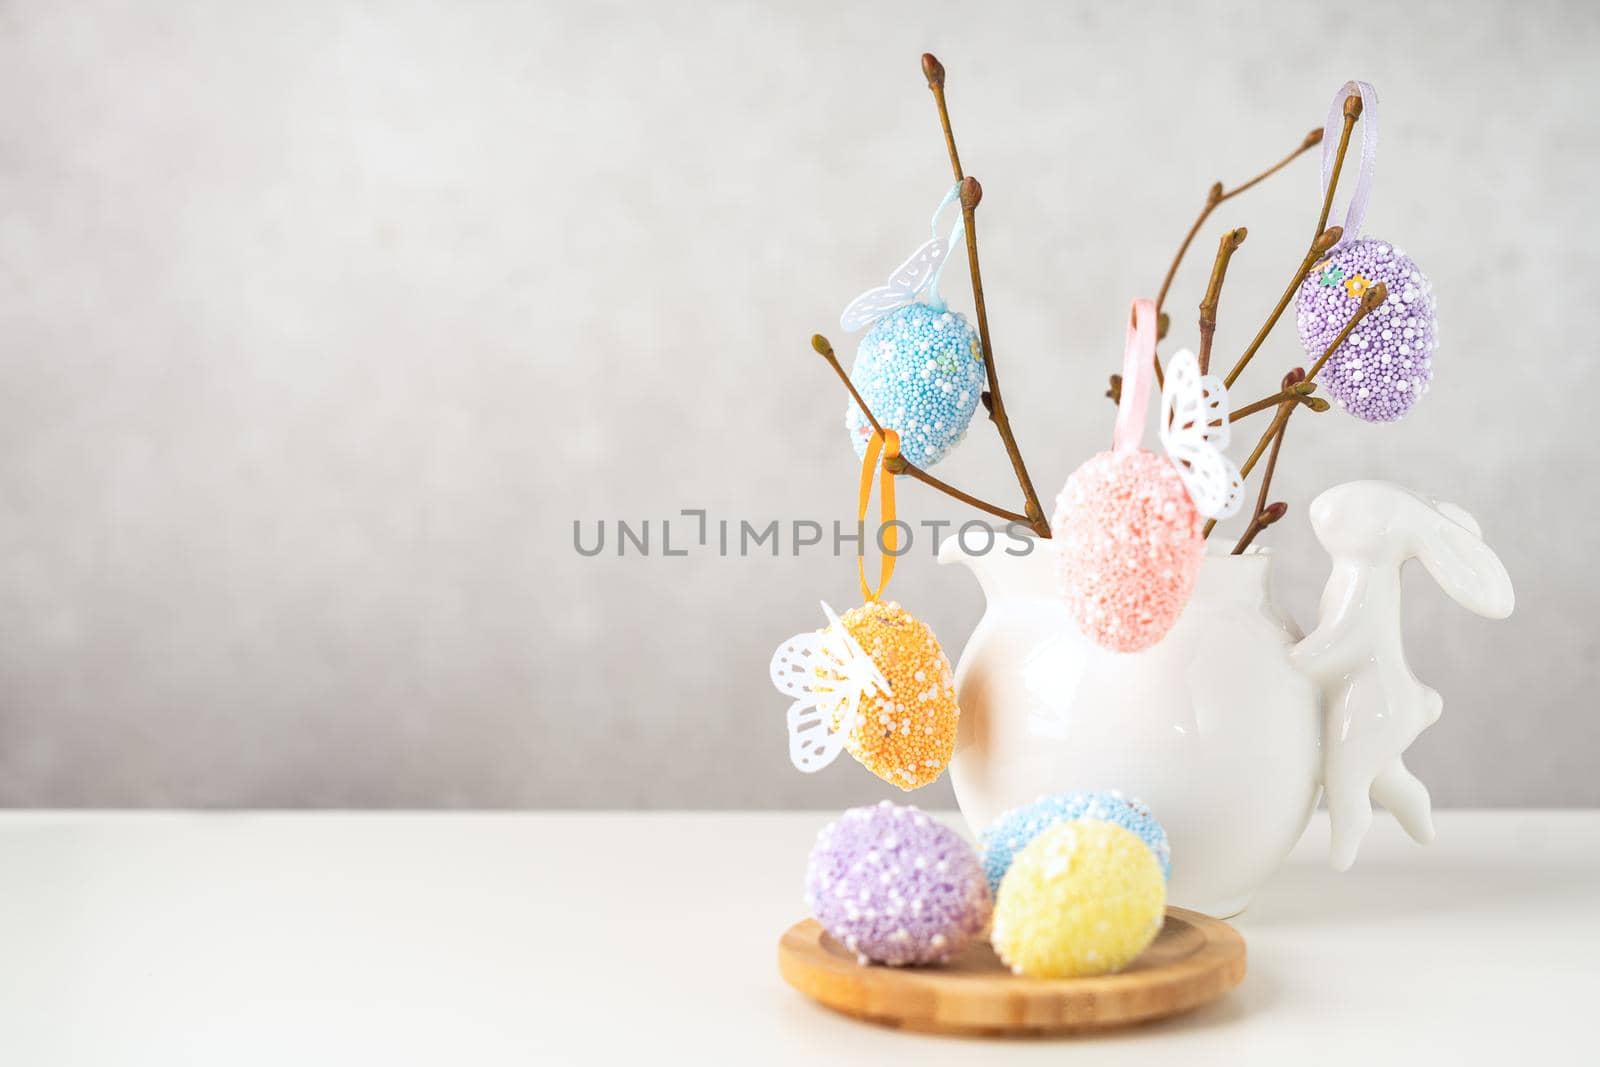 Home interior with easter decor. Vase with willow tree branches with Easter eggs and bunny on white table and background with copy space.